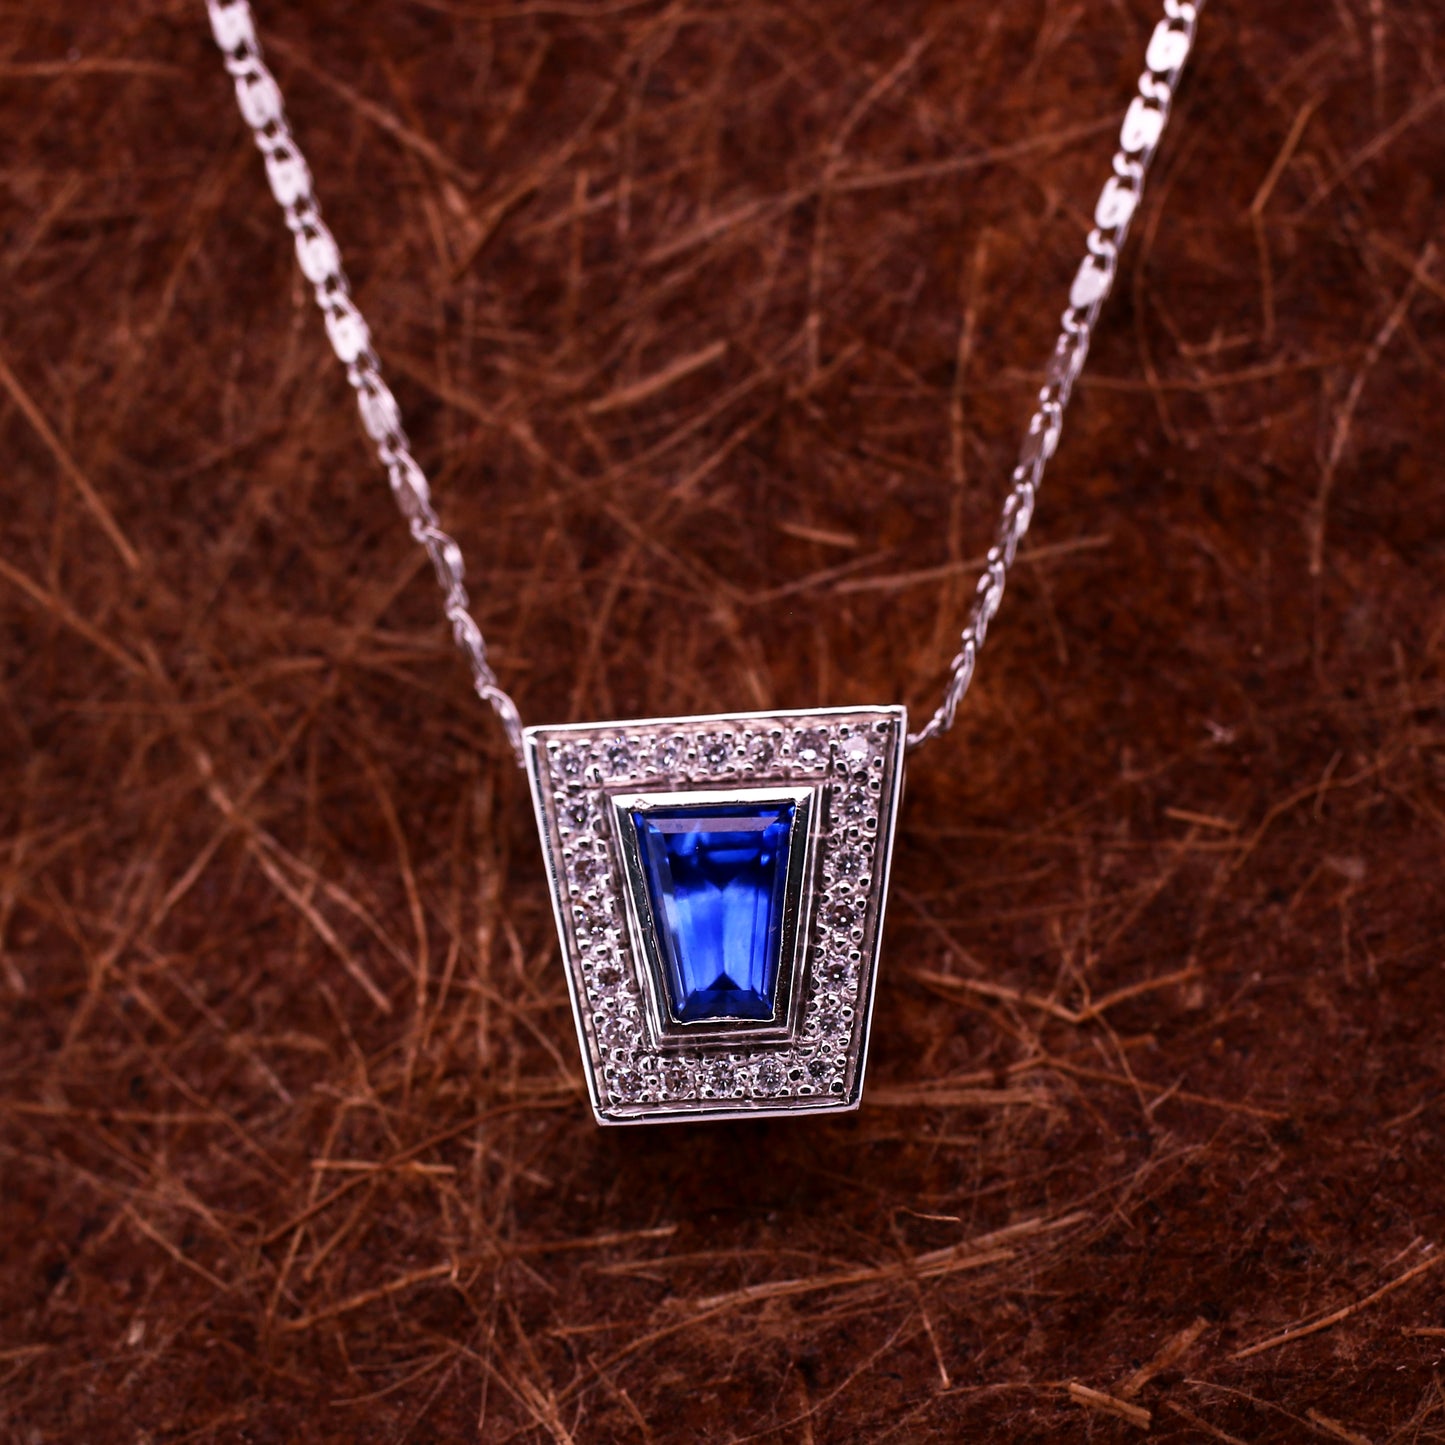 Beautiful and Almost Flawless Vivid Blue Sapphire has been Elegantly set with Natural Diamonds to create this 18kt White Gold Pendant.